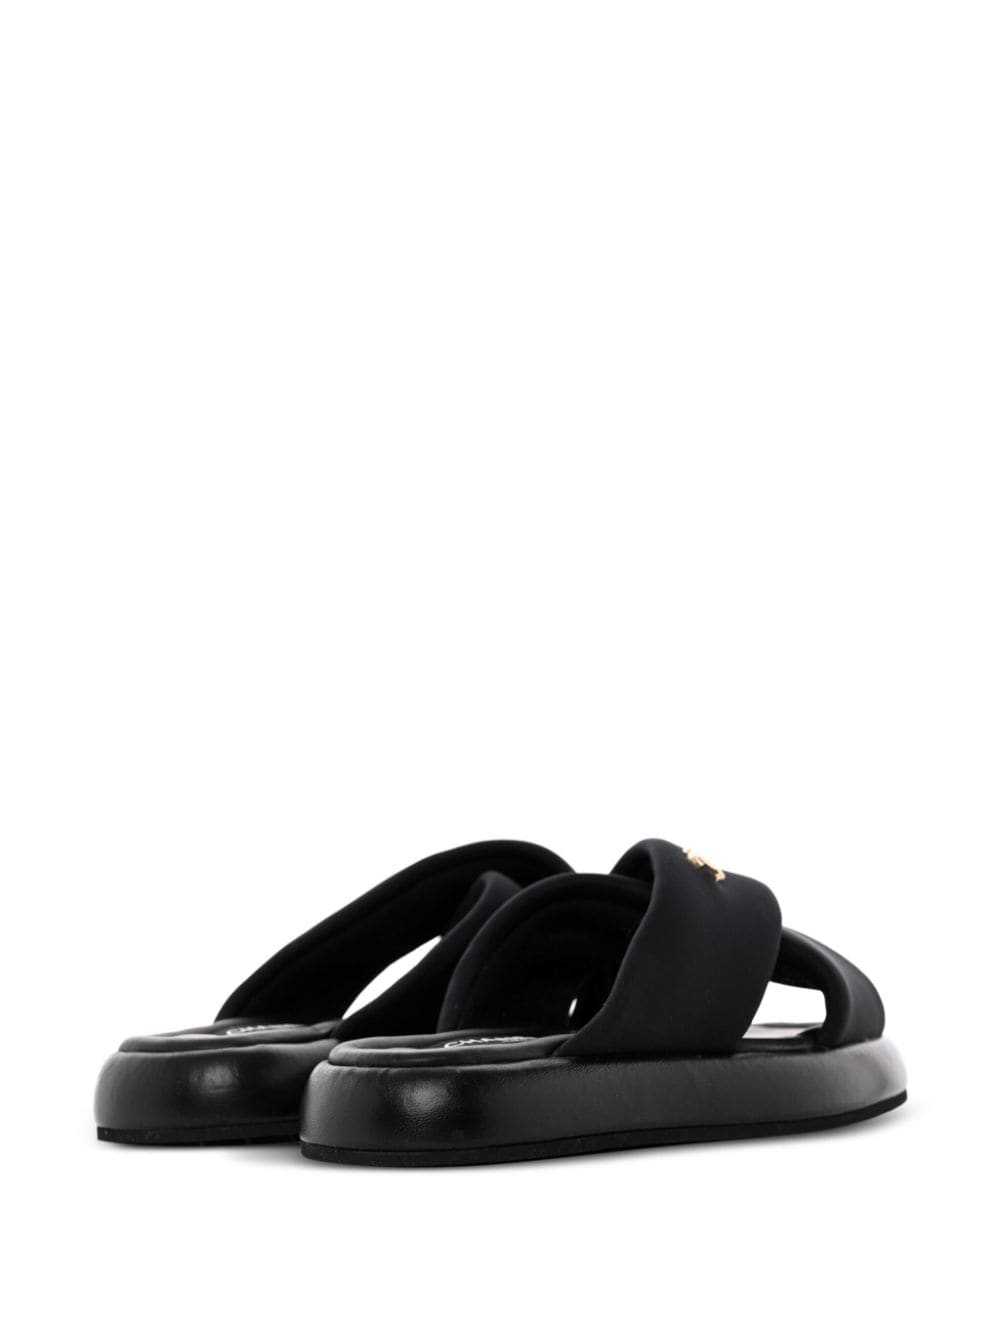 CHANEL Pre-Owned CC criss-cross pool slides - Bla… - image 3